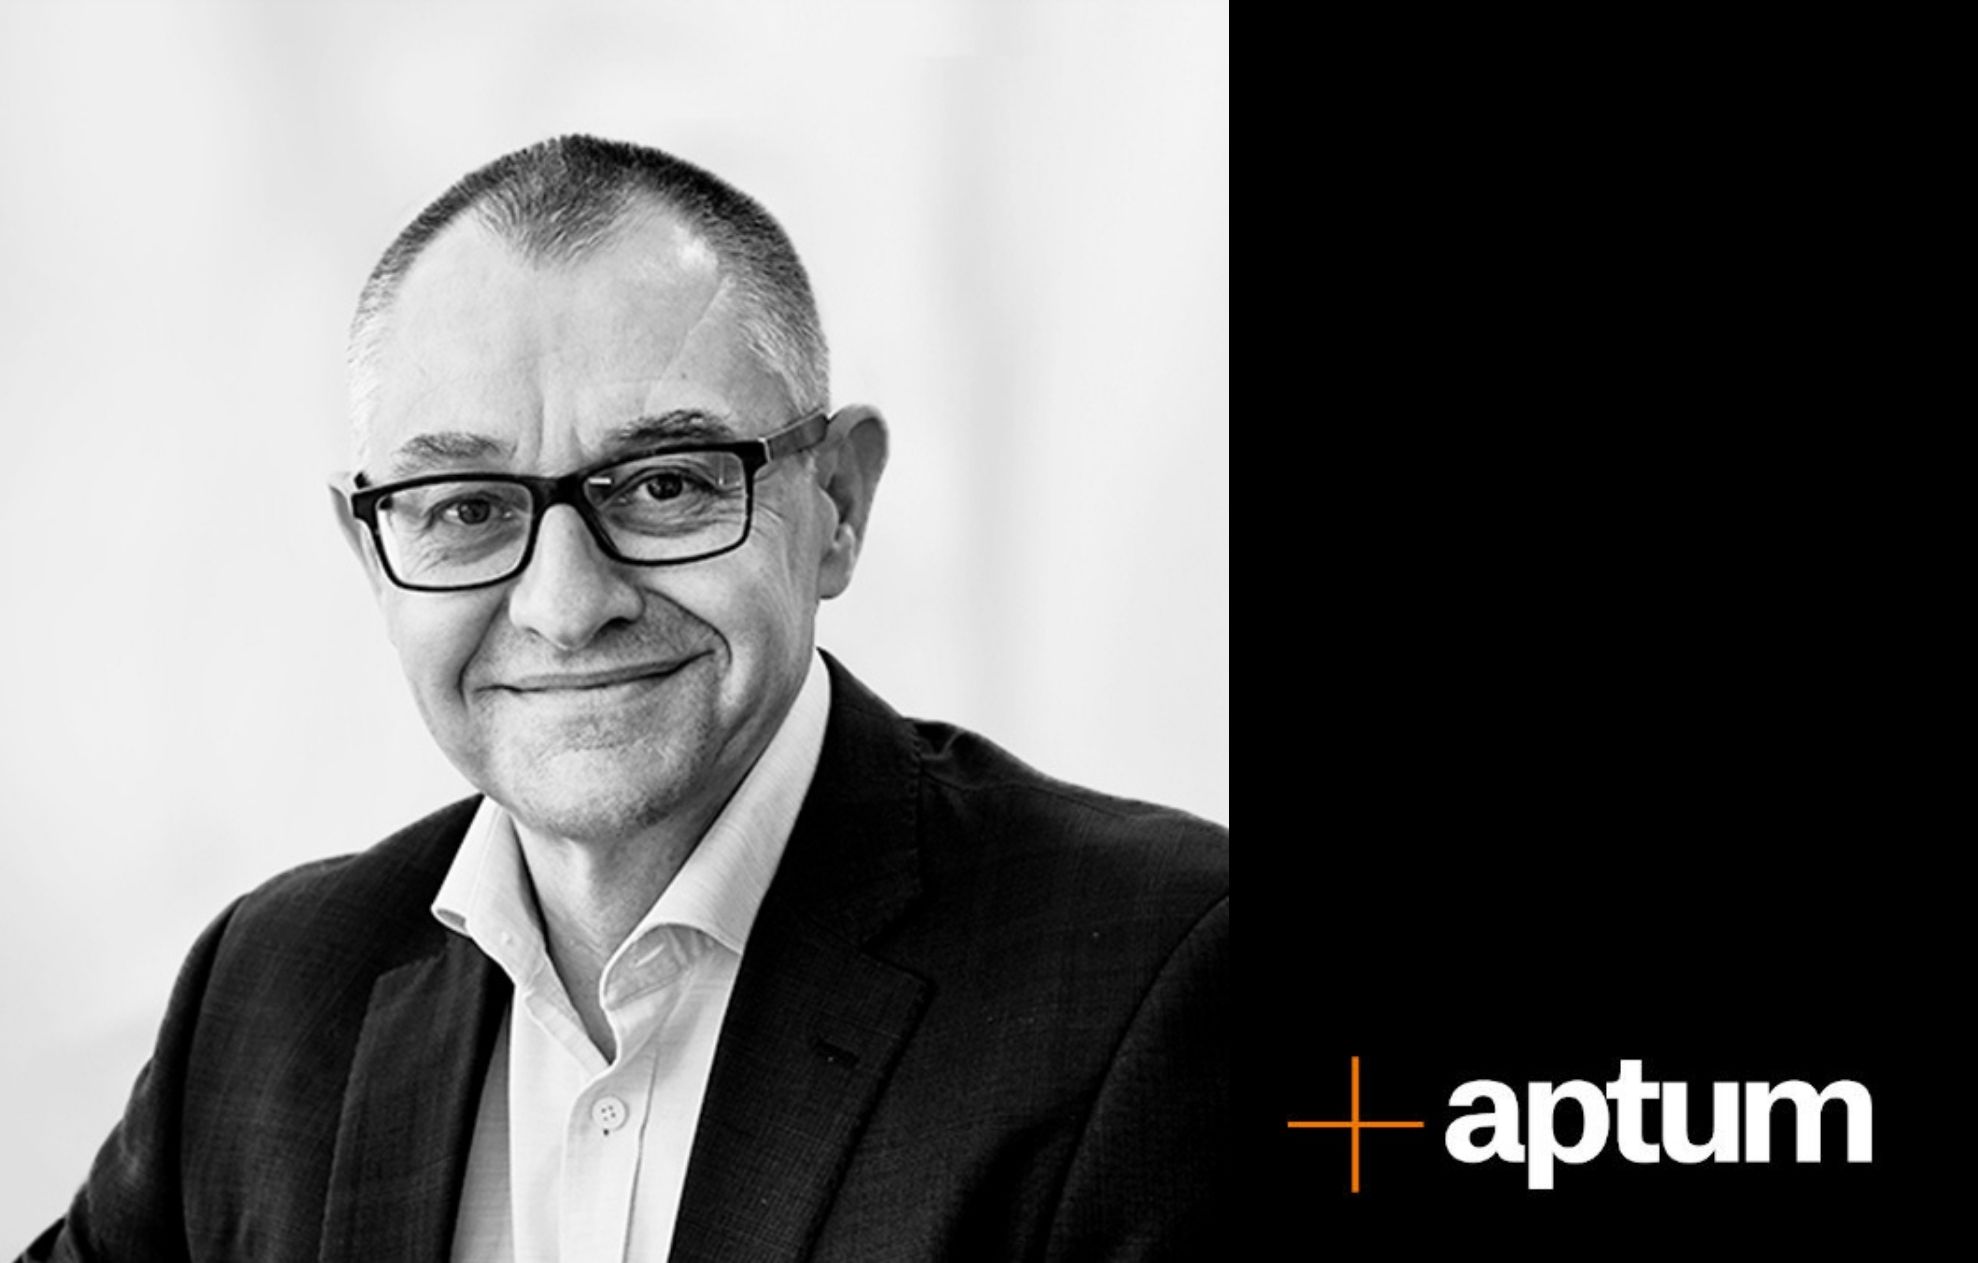 A headshot of David Wells on the left with a black panel on the right featuring the Aptum logo